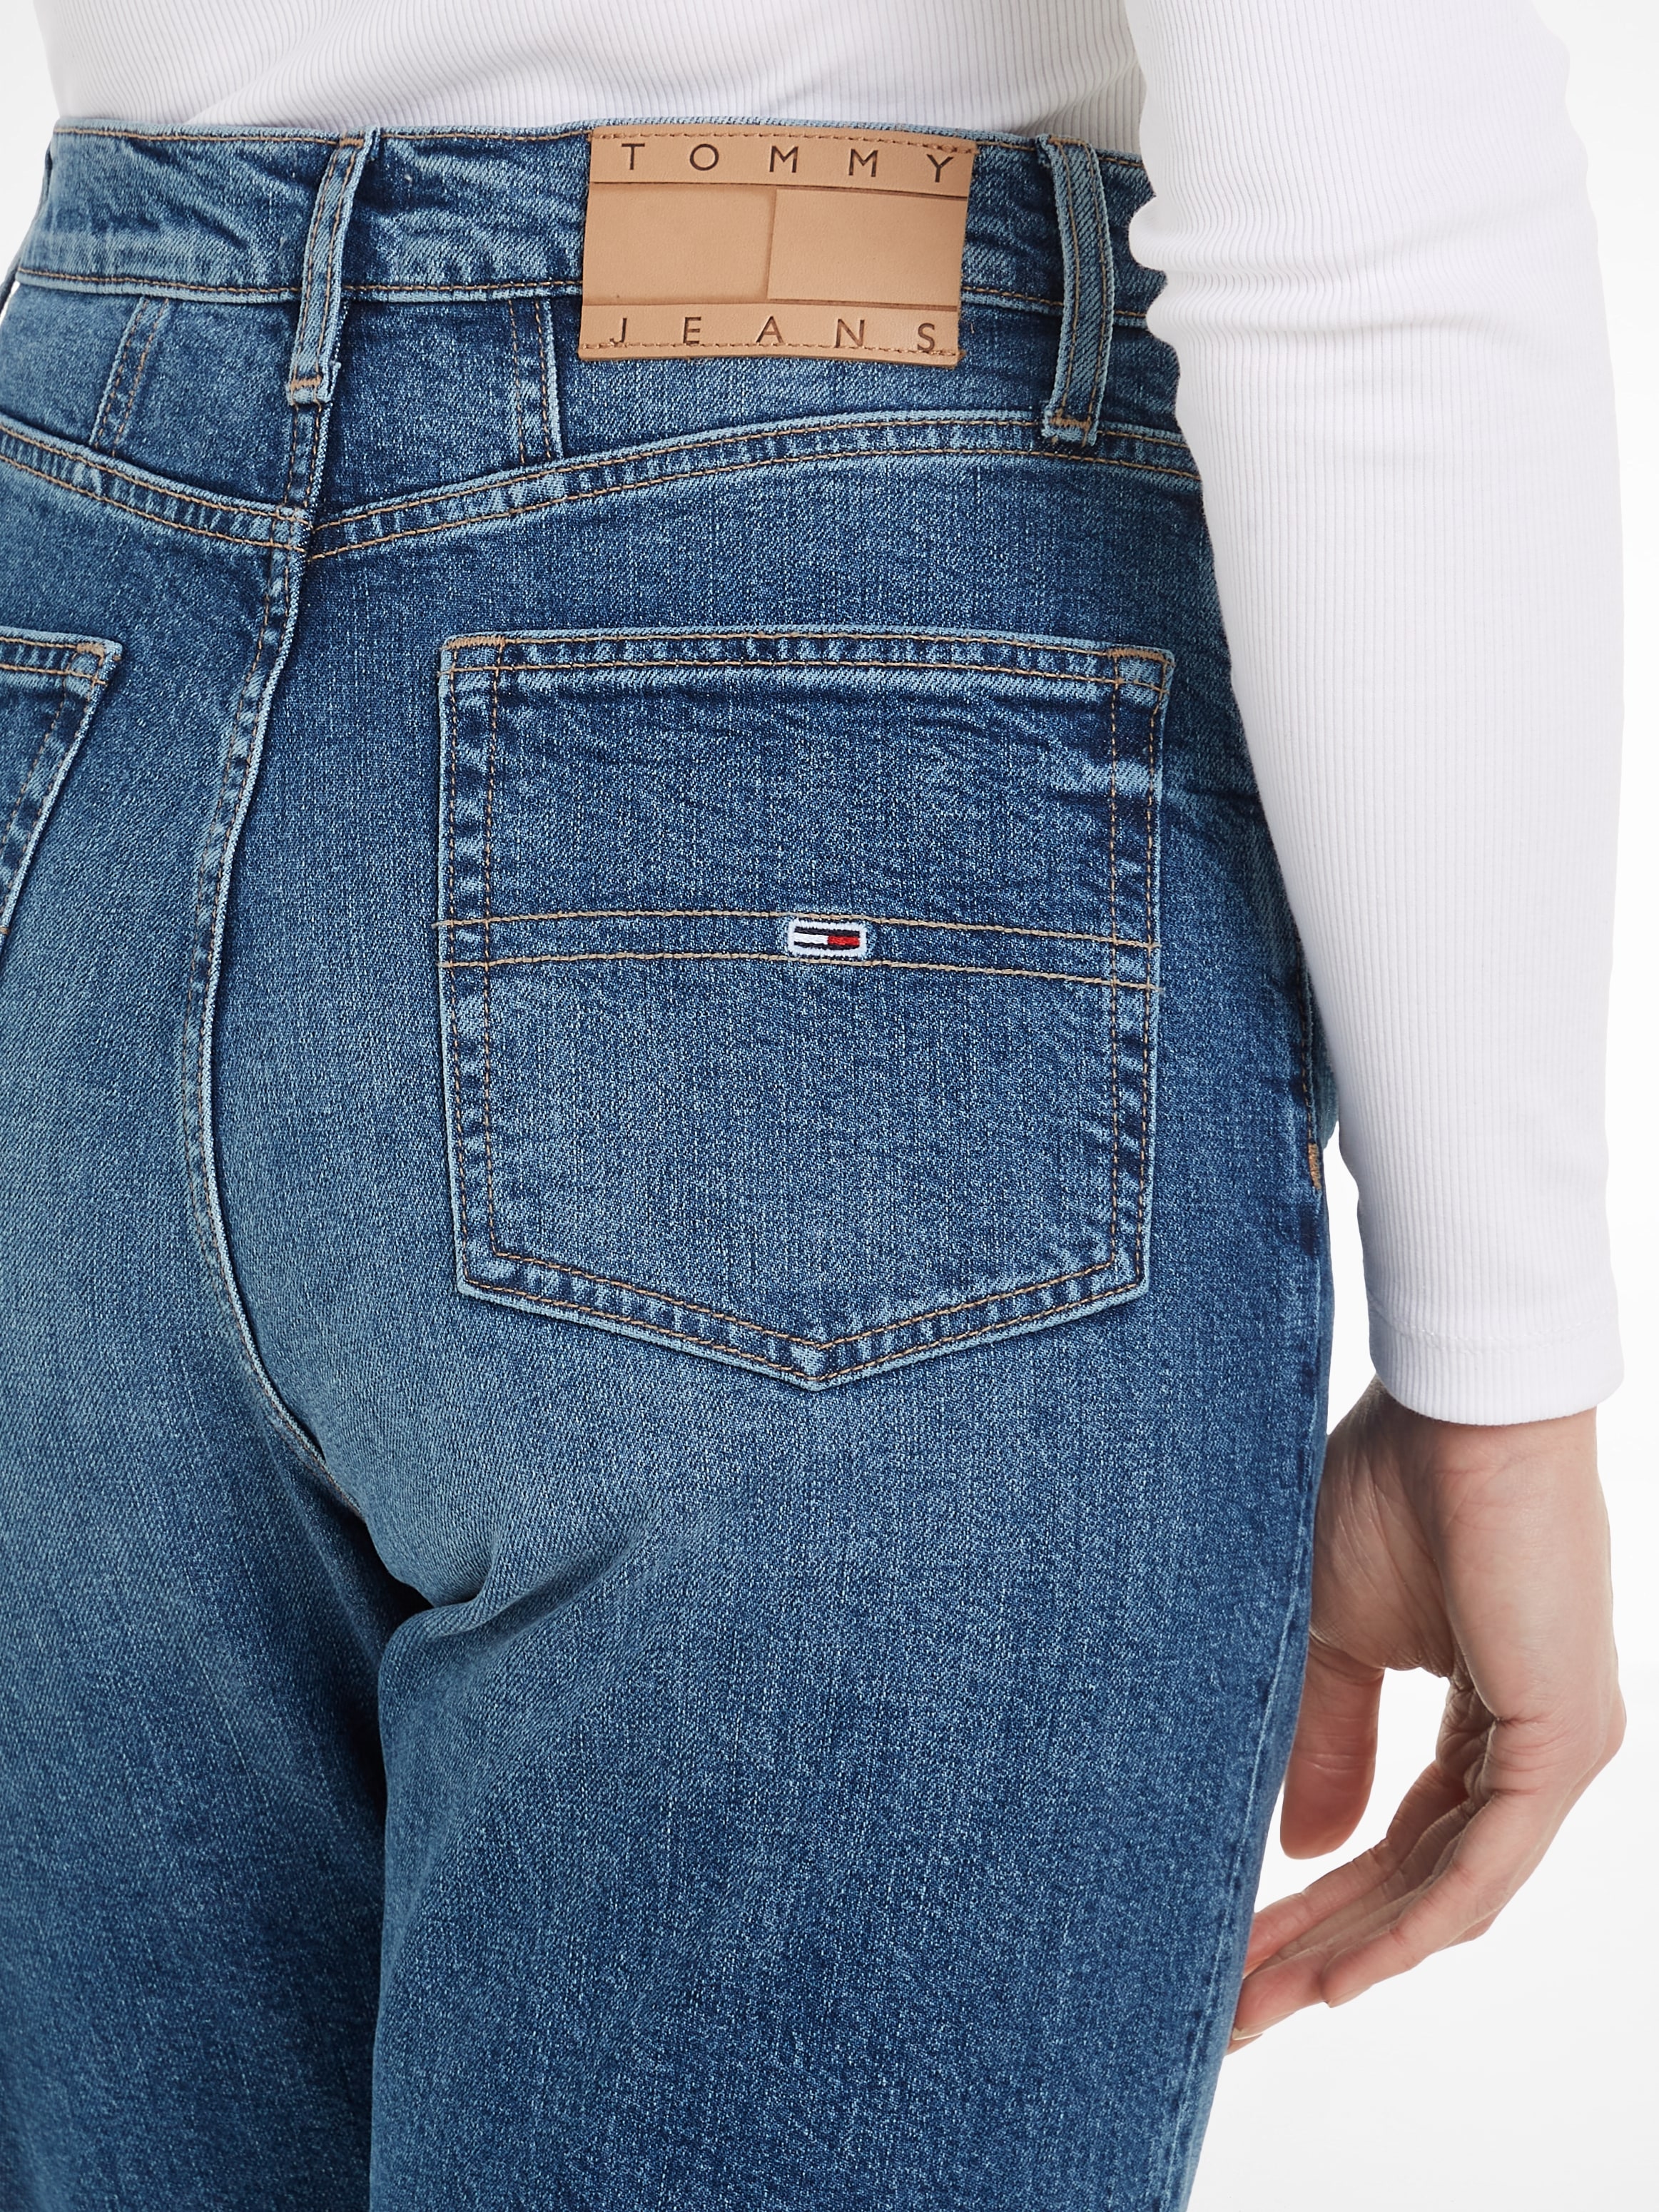 »MOM ♕ Logopatch Tommy Jeans UH bei Mom-Jeans mit DG«, JEAN TPR